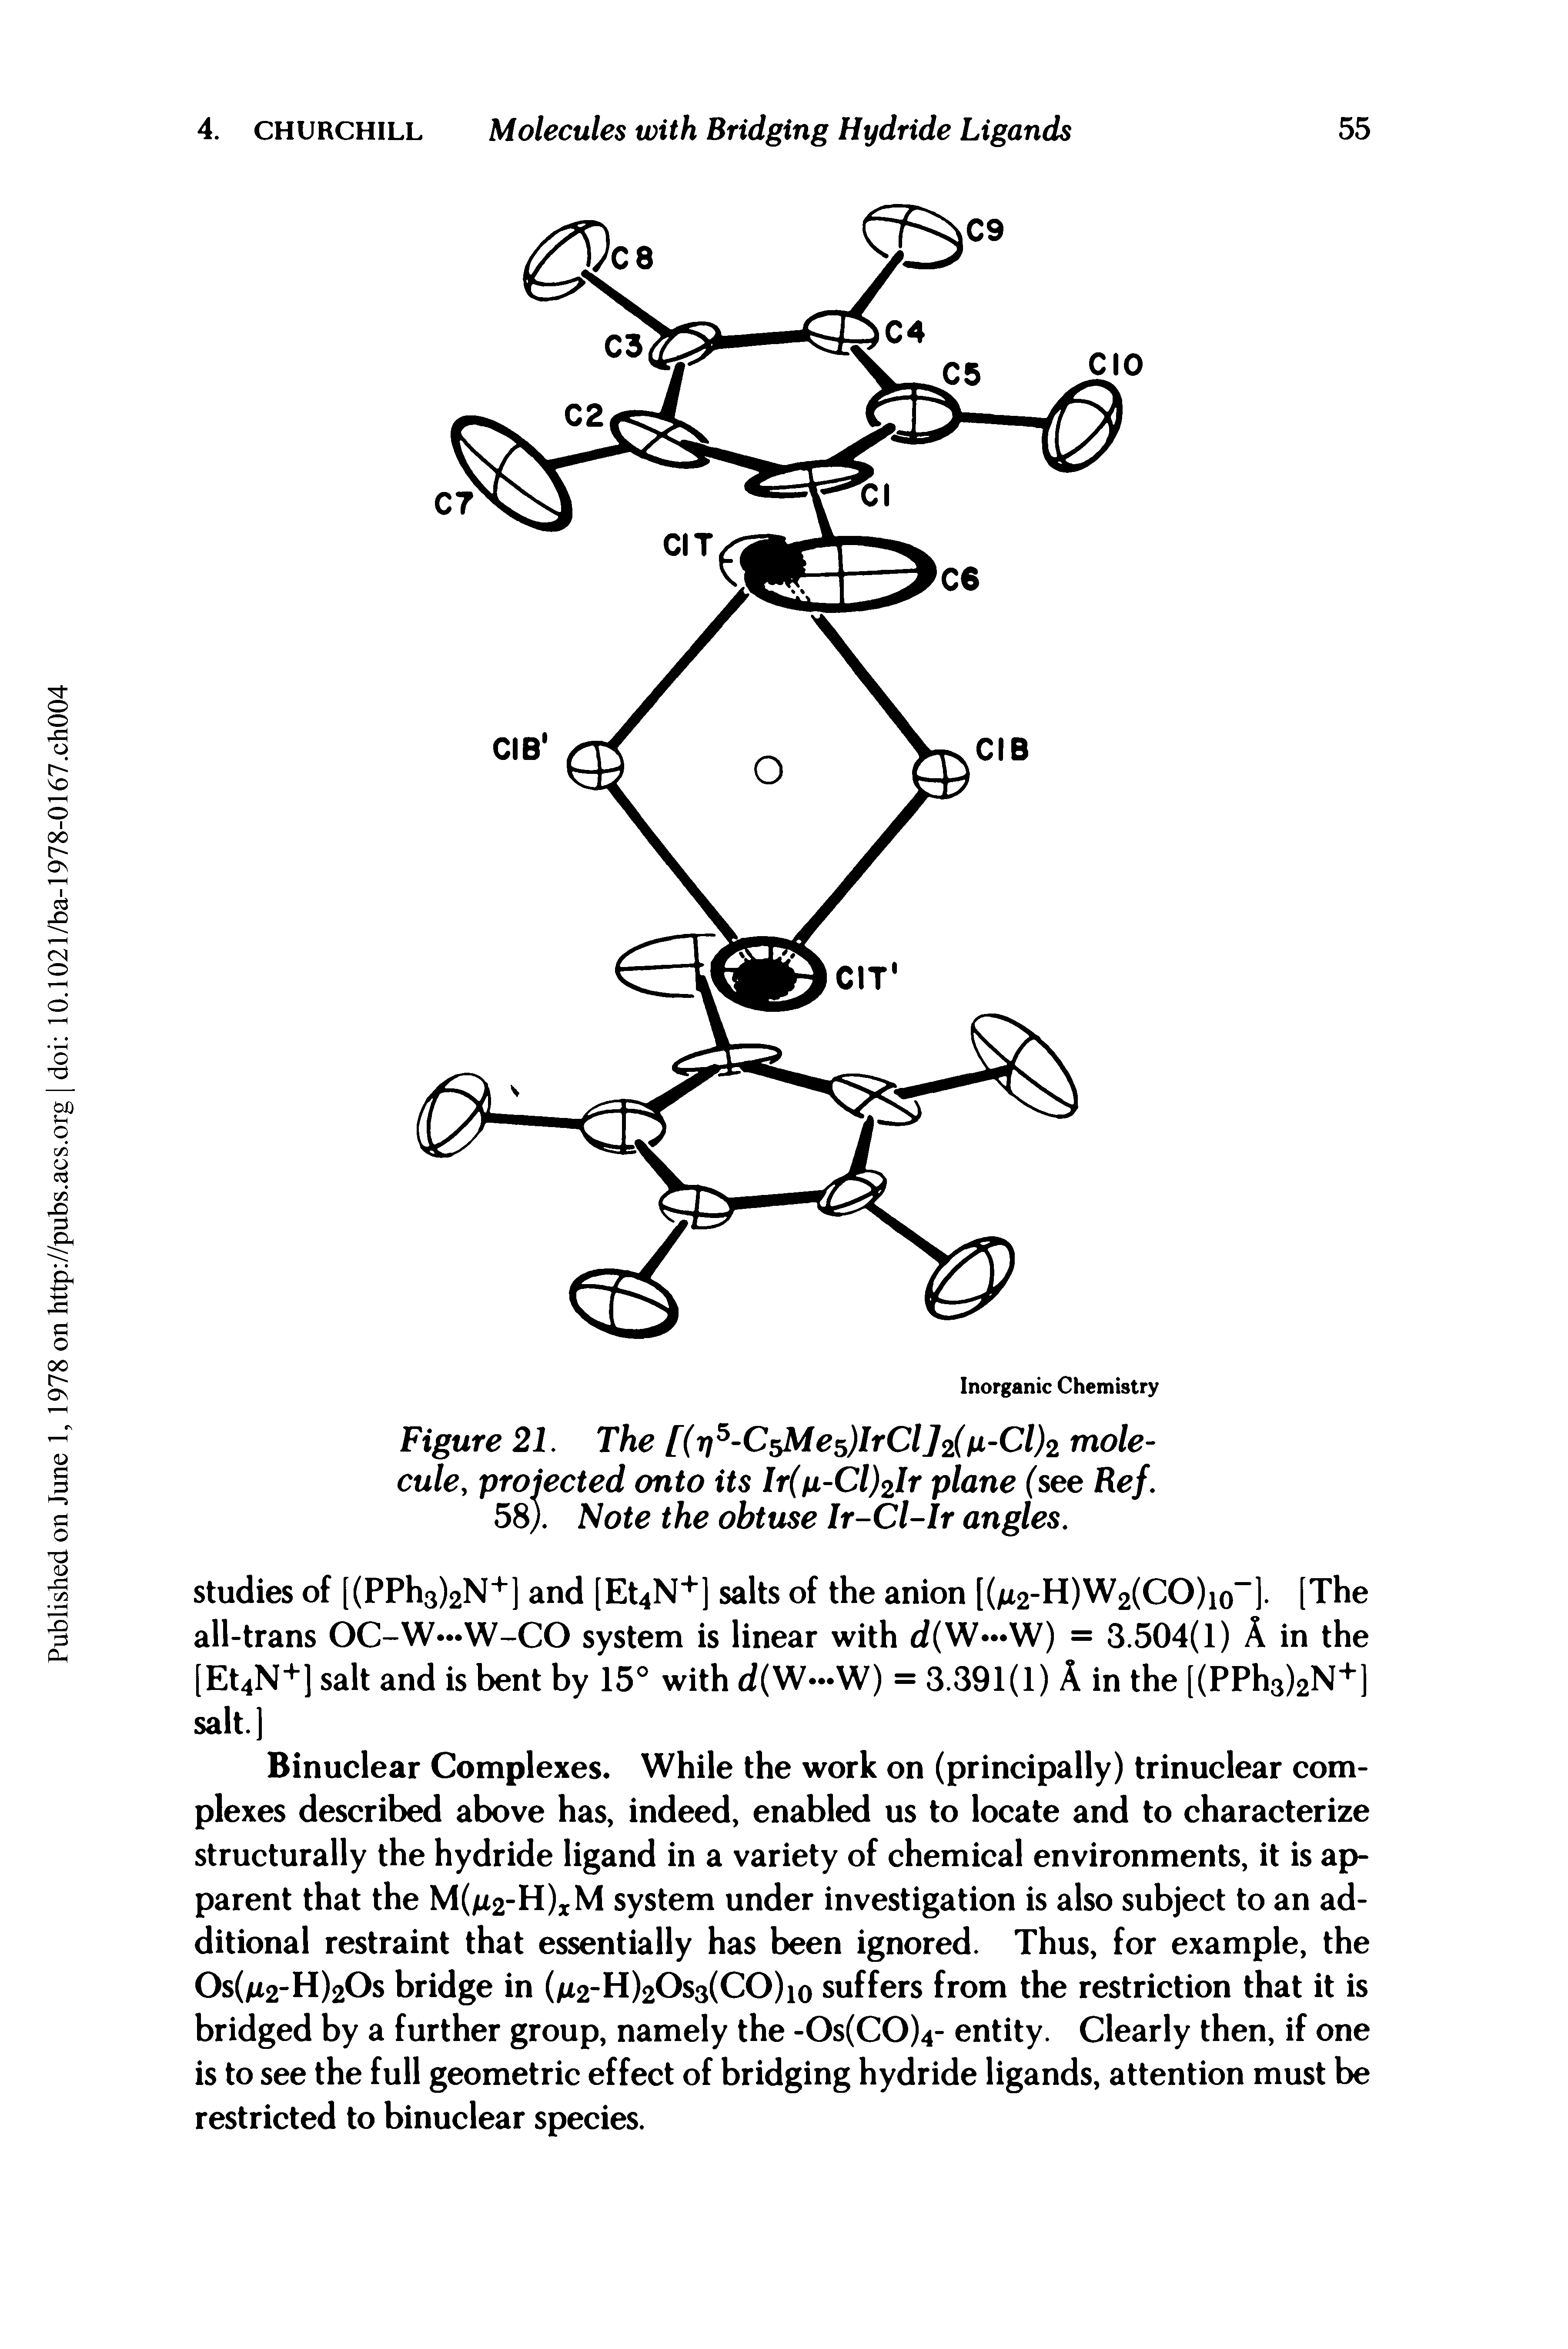 Figure 21. The [( -CsMe IrClJzin-Cl) . molecule, projected onto its Ir(fi-Cl)2lr plane (see Ref. 58). Note the obtuse Ir-Cl-Ir angles.